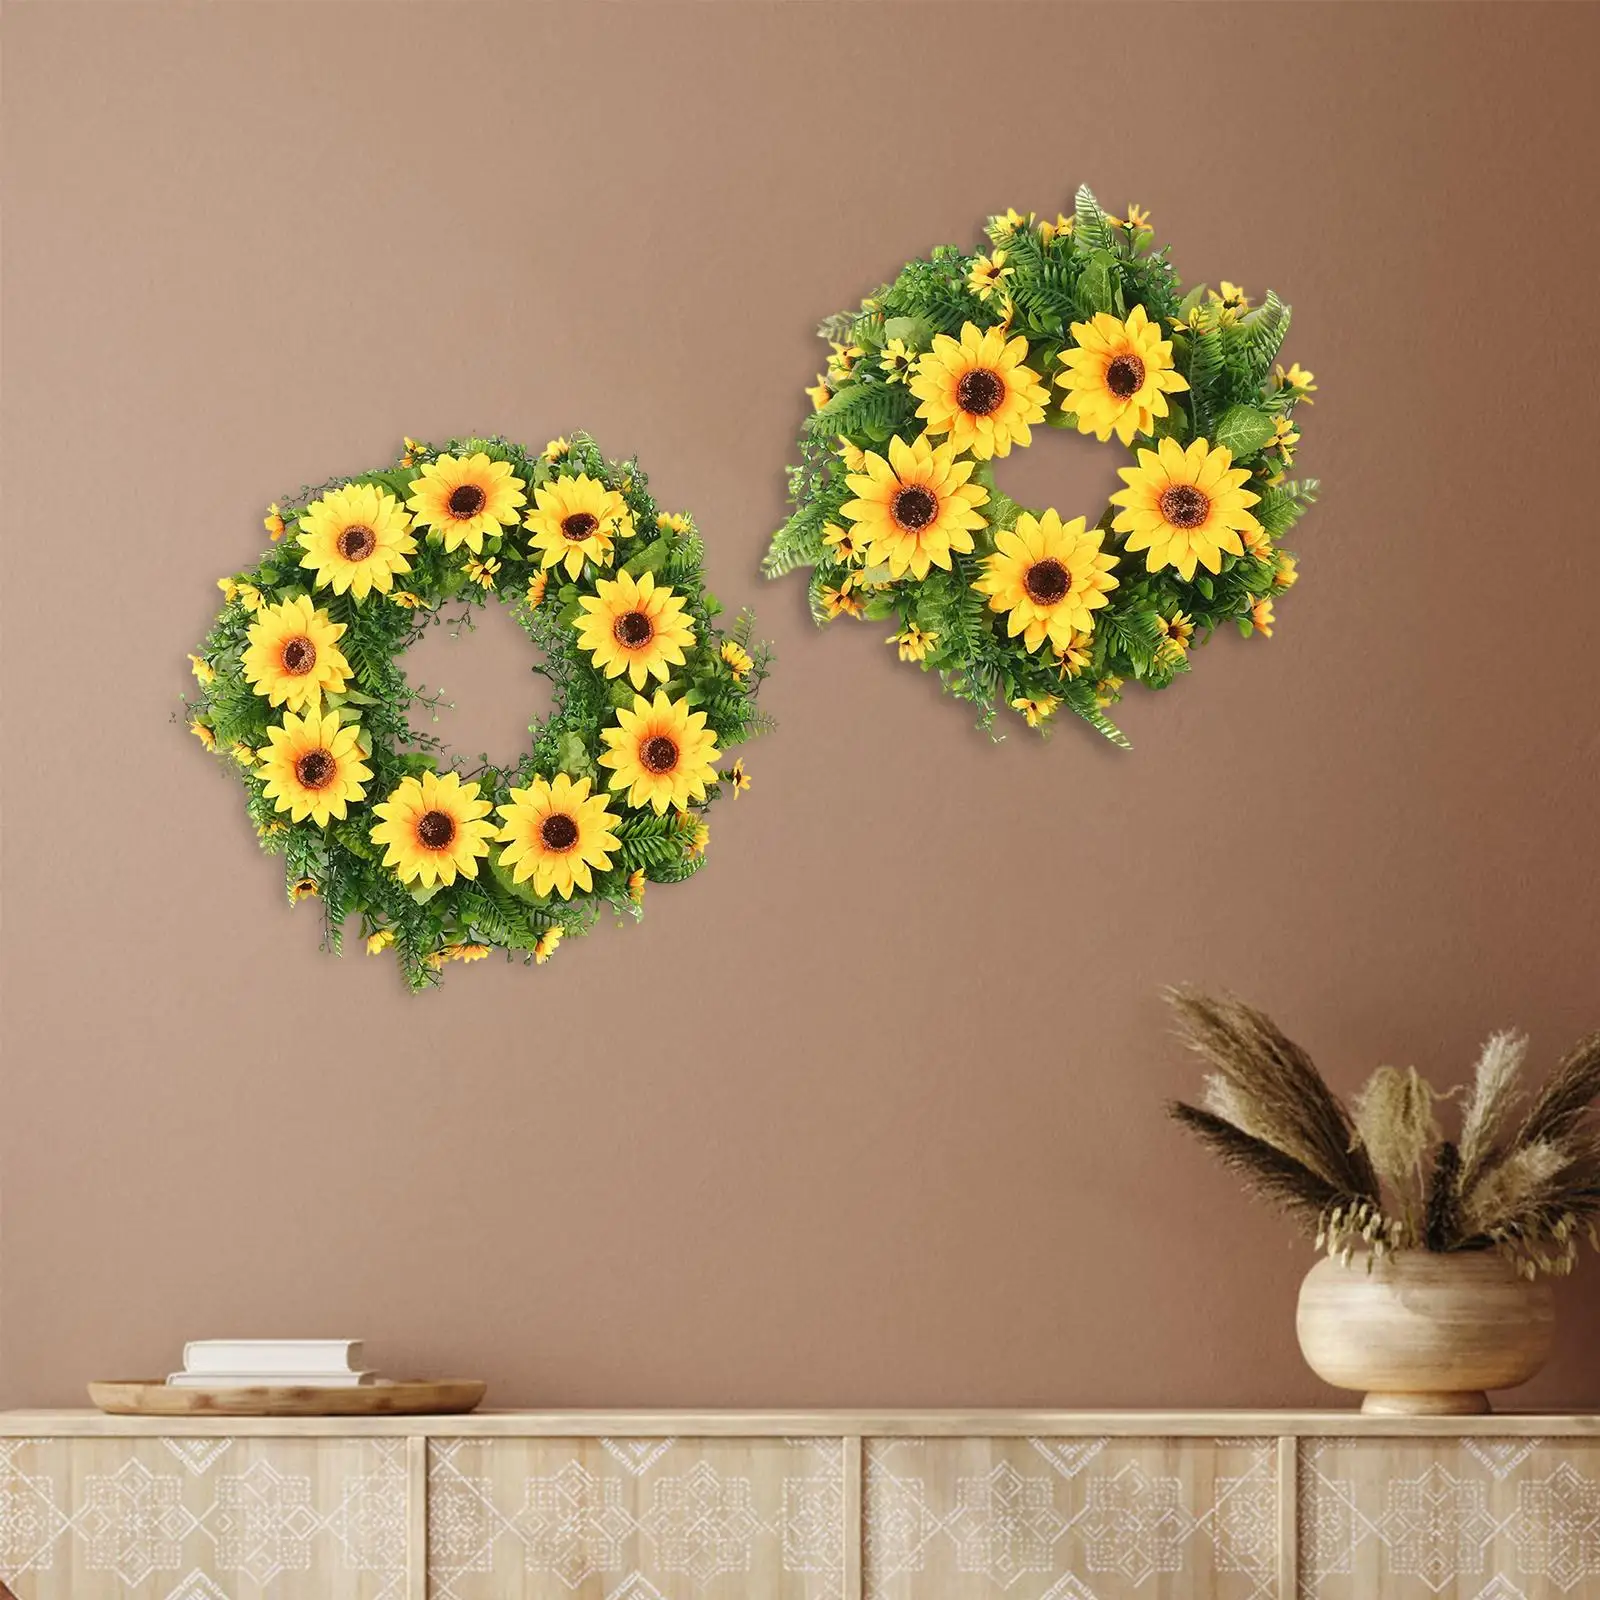 Artificial Wreath Hanging Garland for Home Decor Yard Fireplace